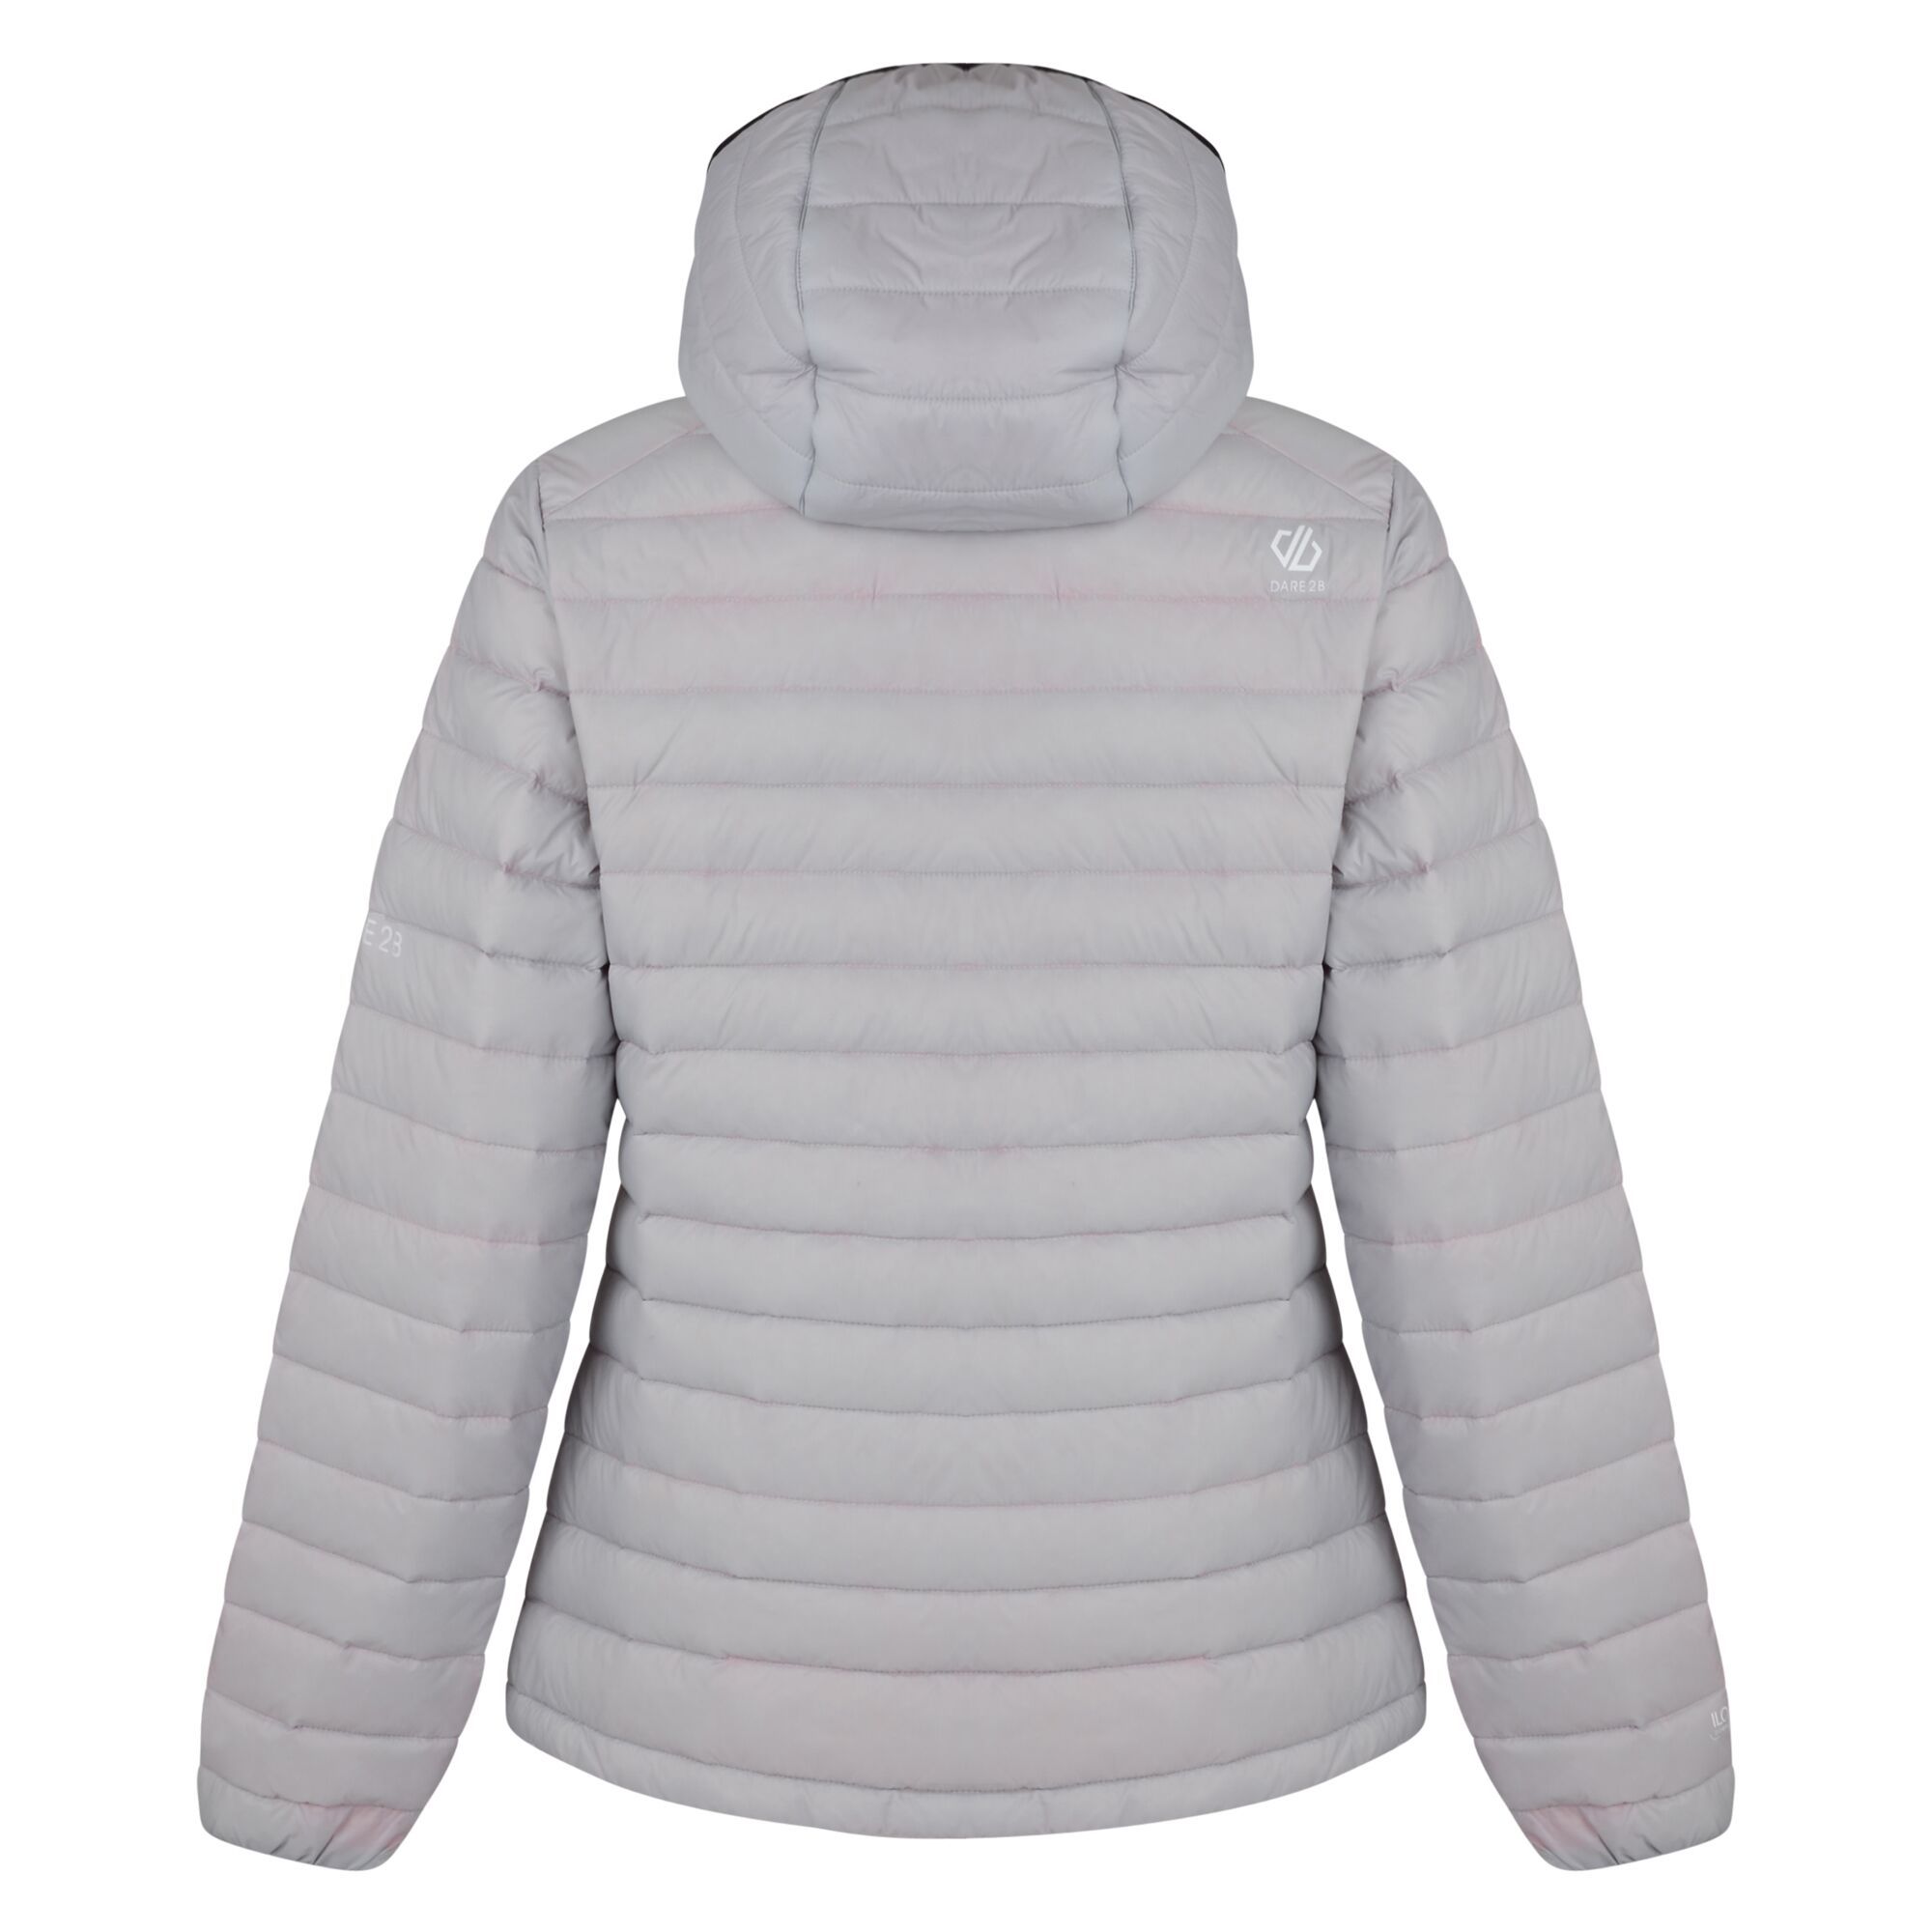 Material: polyimide: 100%. ILoft Down fill power 600. Premium duck down fill - 90% down, 10% feathers. Nylon/Polyester downproof fabric. Water repellent finish. High warmth to weight ratio. Grown on hood. 2 lower zip pockets. Stretch binding to hood. Elasticated cuffs. Adjustable hem. Packaway style.